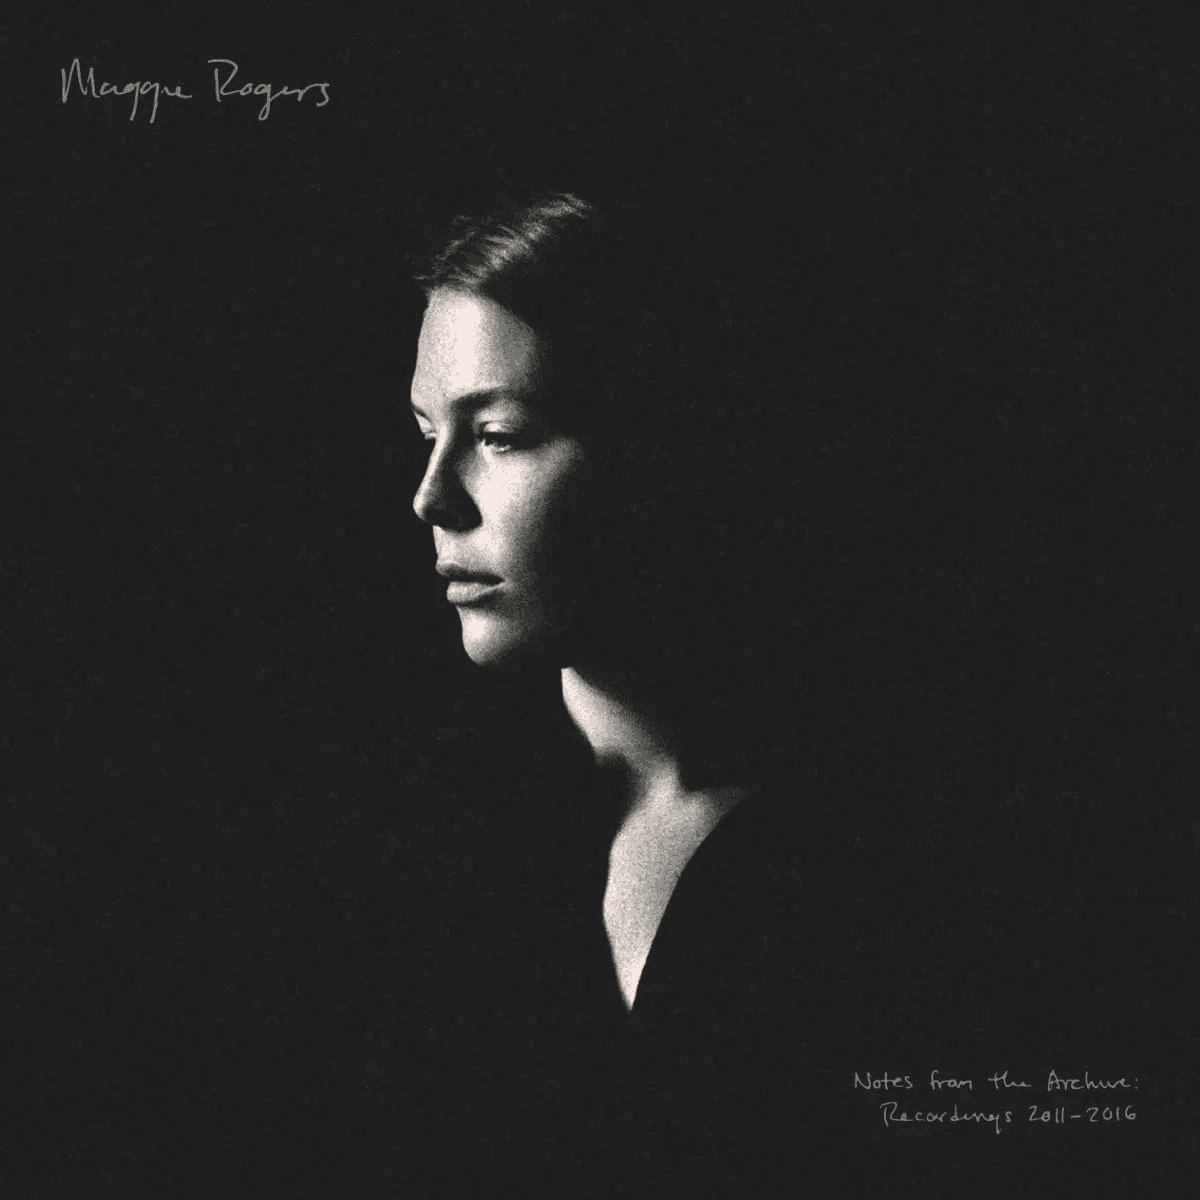 MAGGIE ROGERS - Notes From The Archives: Recordings 2011-2016 Vinyl MAGGIE ROGERS - Notes From The Archives: Recordings 2011-2016 Vinyl 